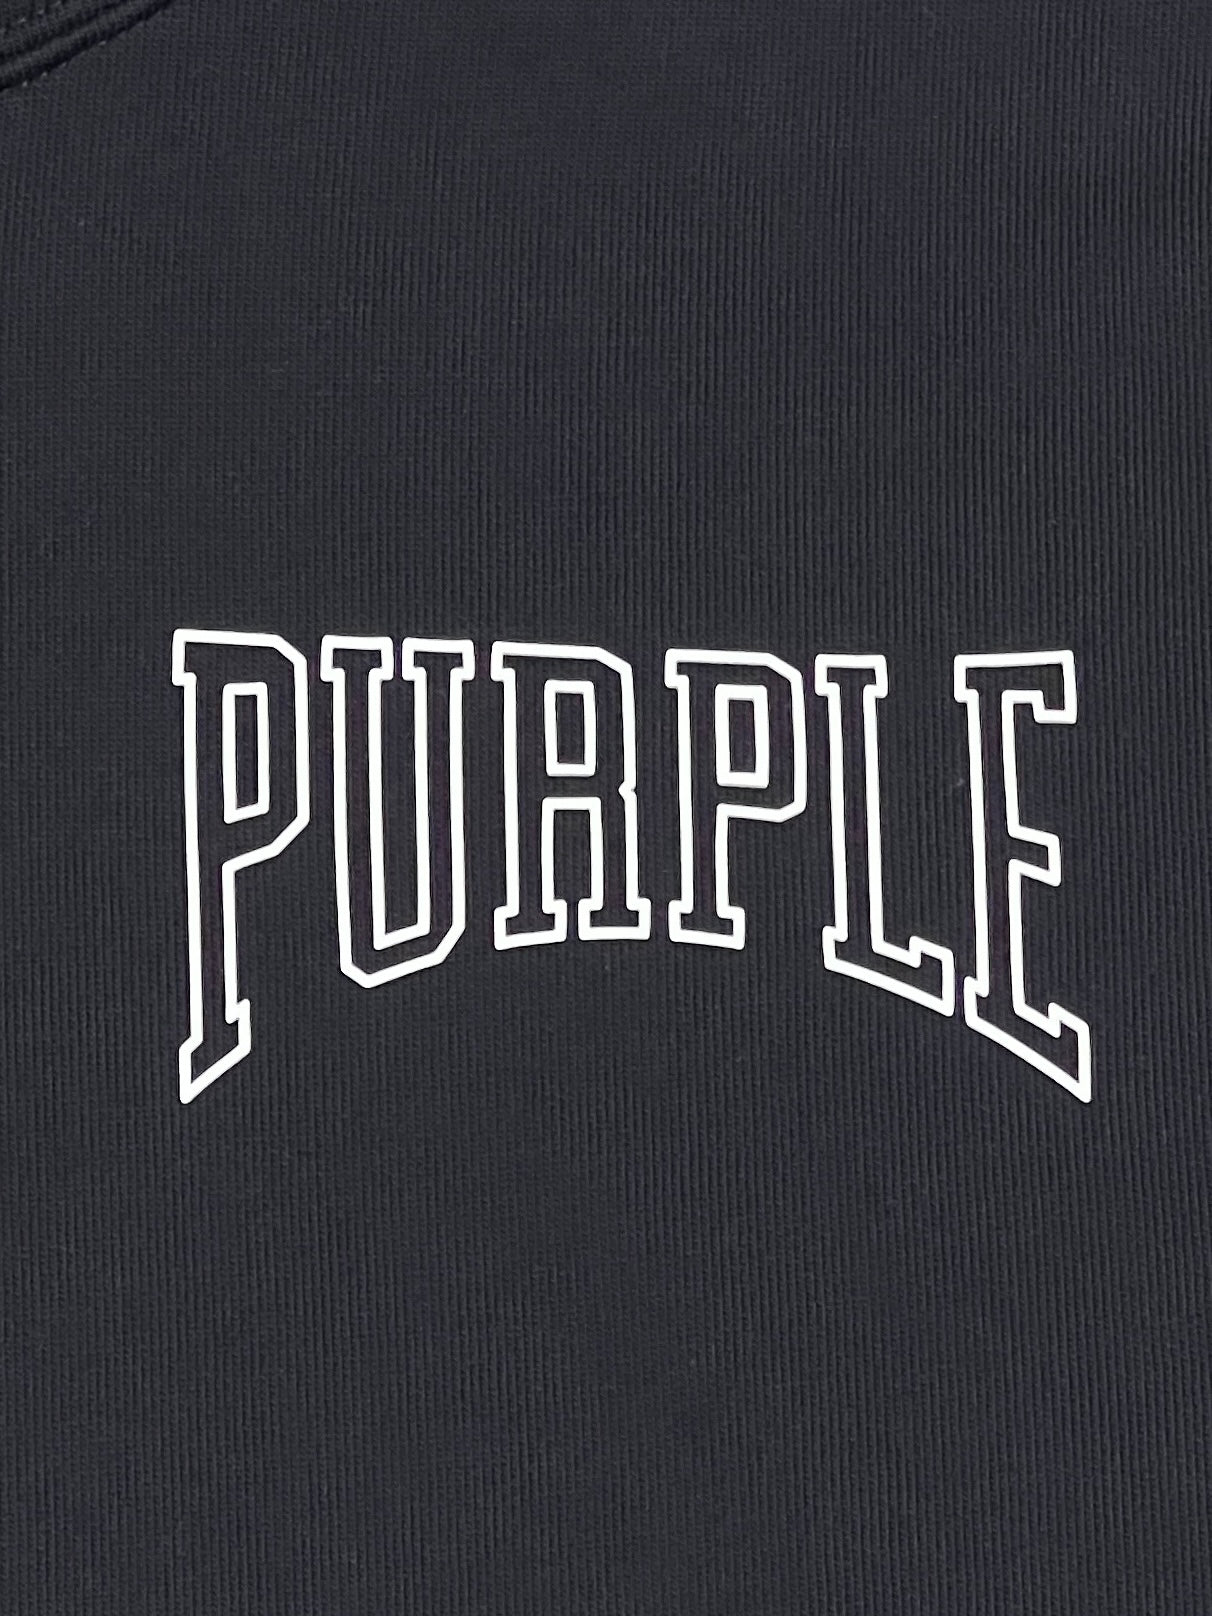 Close-up of the word "PURPLE" printed in white outline font on a BLACK PURPLE BRAND P447-FFBB FRENCH TERRY PO HOODY background.